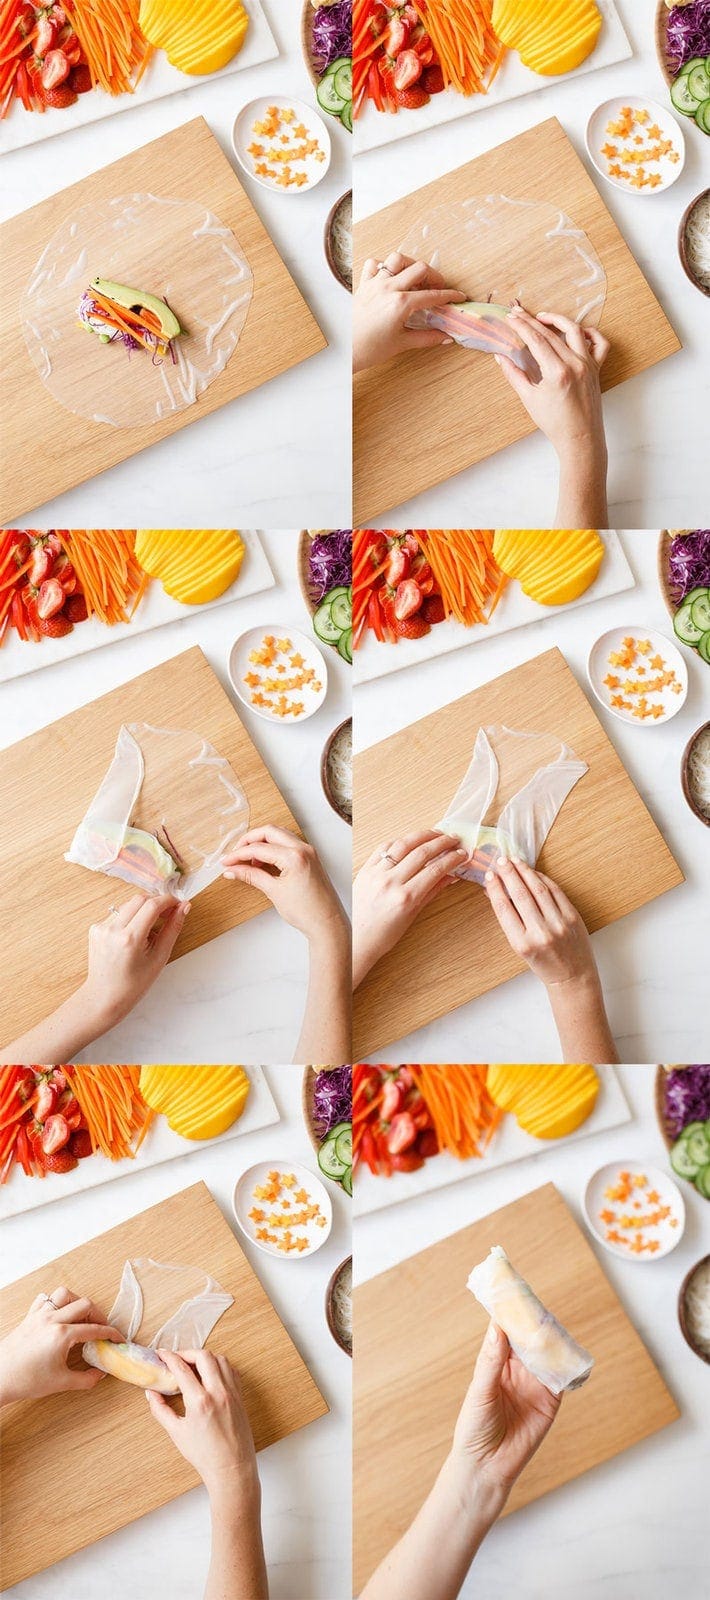 A step by step photo montage showing how to roll Vietnamese rice paper rolls